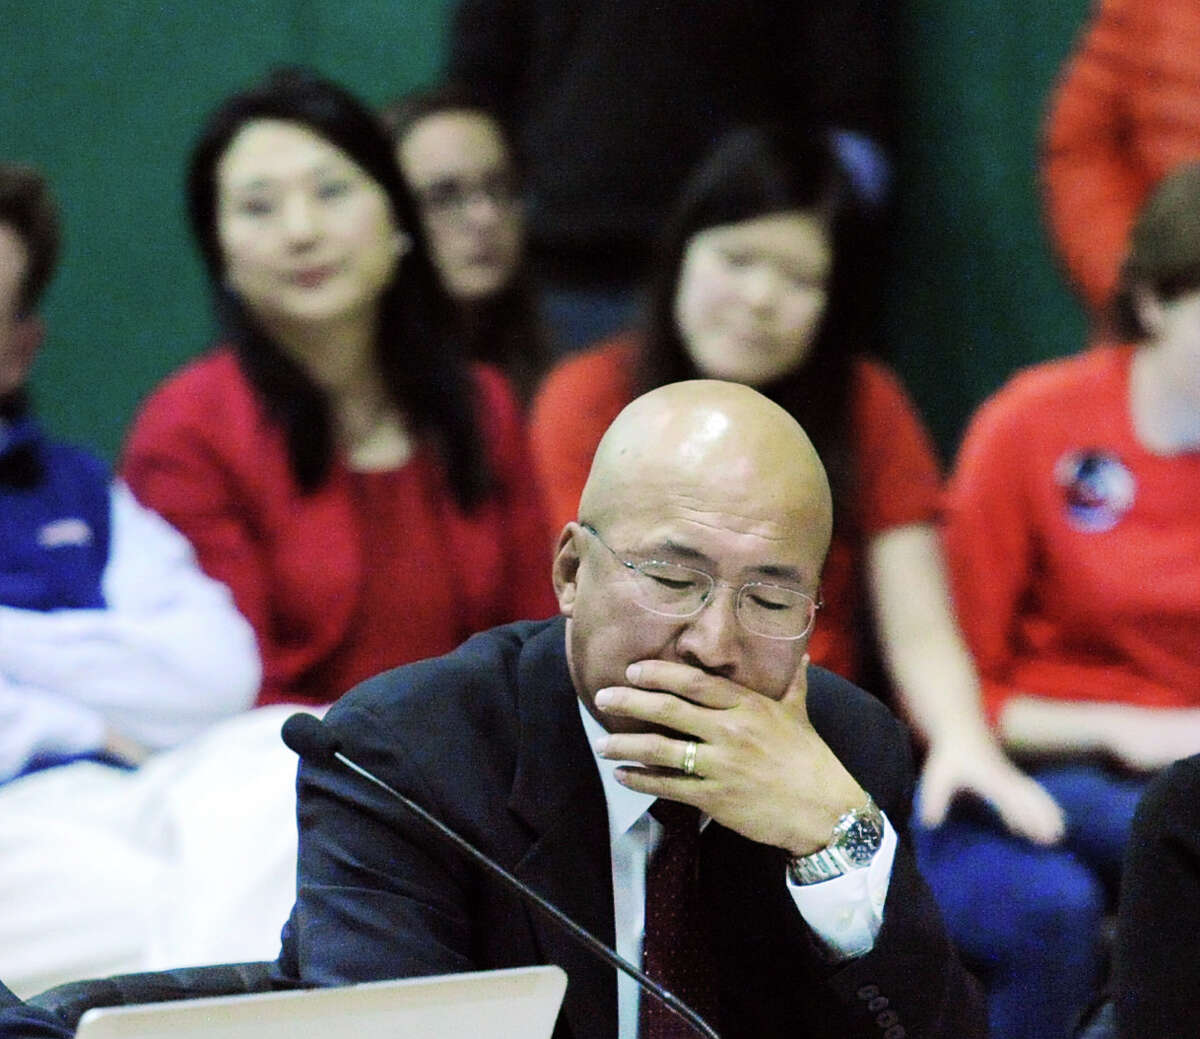 The Greenwich Board of Education appeal hearing of Greenwich High School band director John Yoon, pictured here, who faces dismissal for allegedly bullying two students, at Julian Curtiss School in Greenwich, Conn., Wednesday night, Dec. 9, 2015.